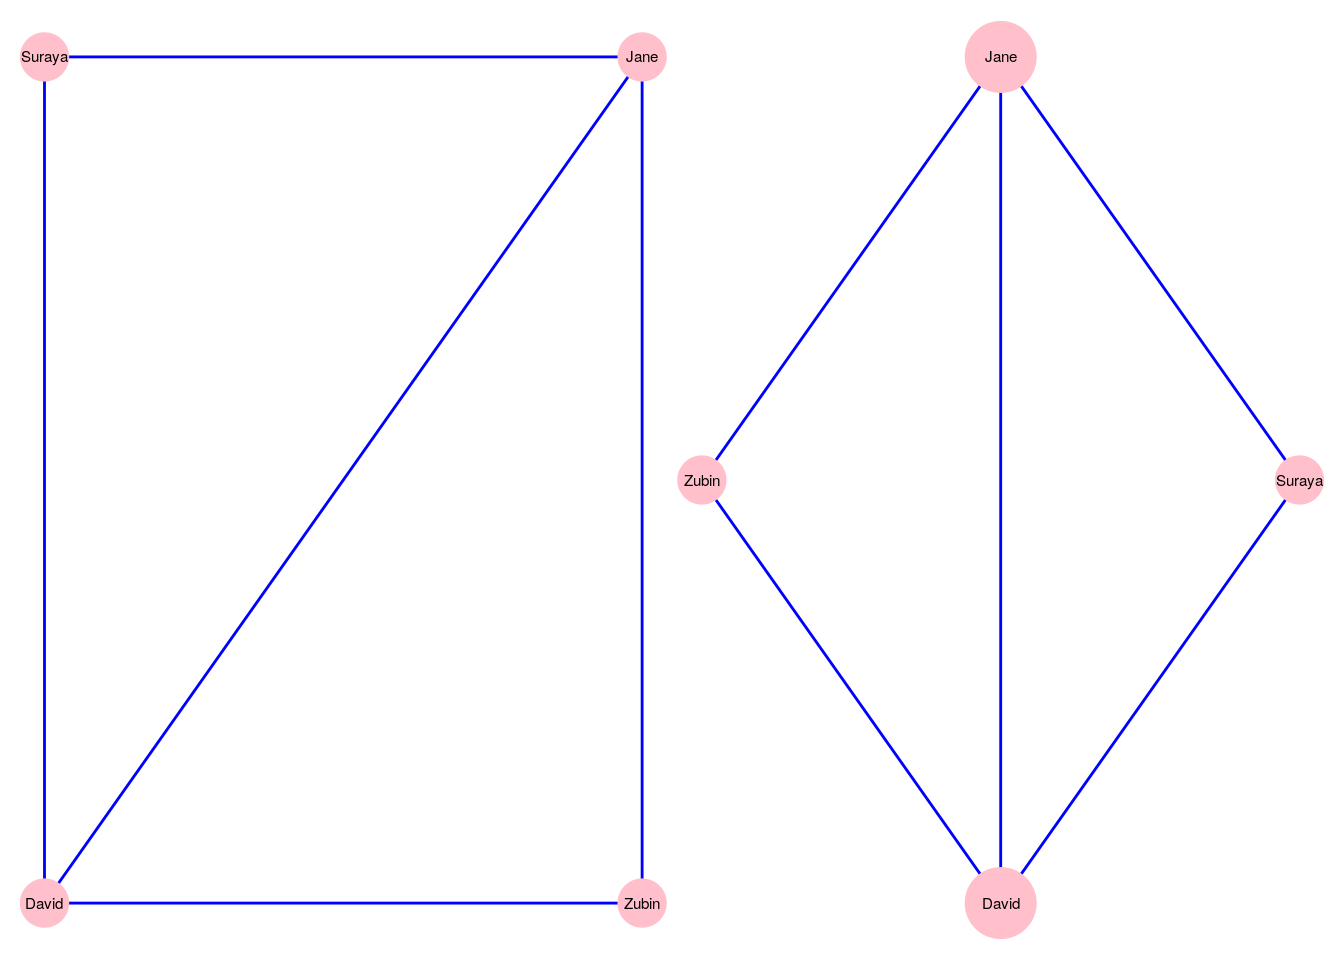 Two different ways of visualizing the $G_\mathrm{work}$ graph